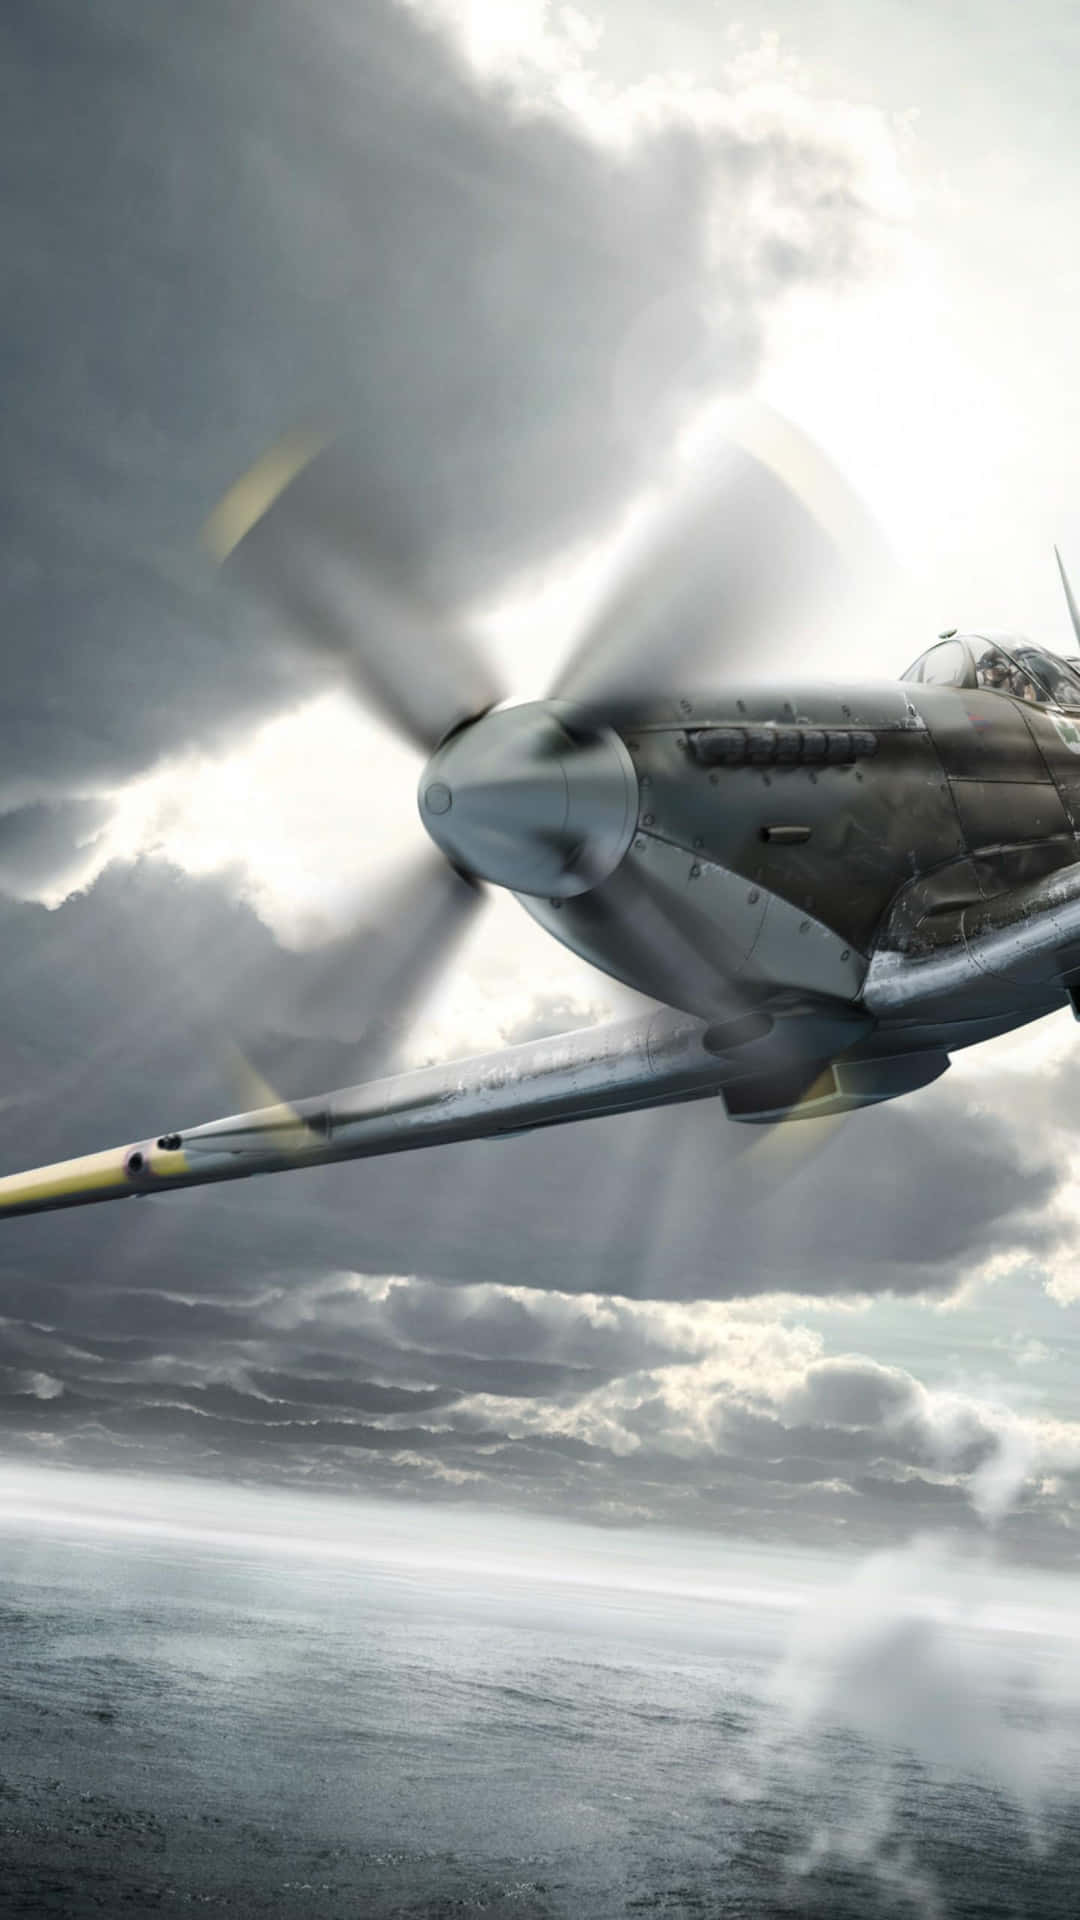 A Spitfire airplane, an iconic symbol of aviation history and the Battle of Britain Wallpaper